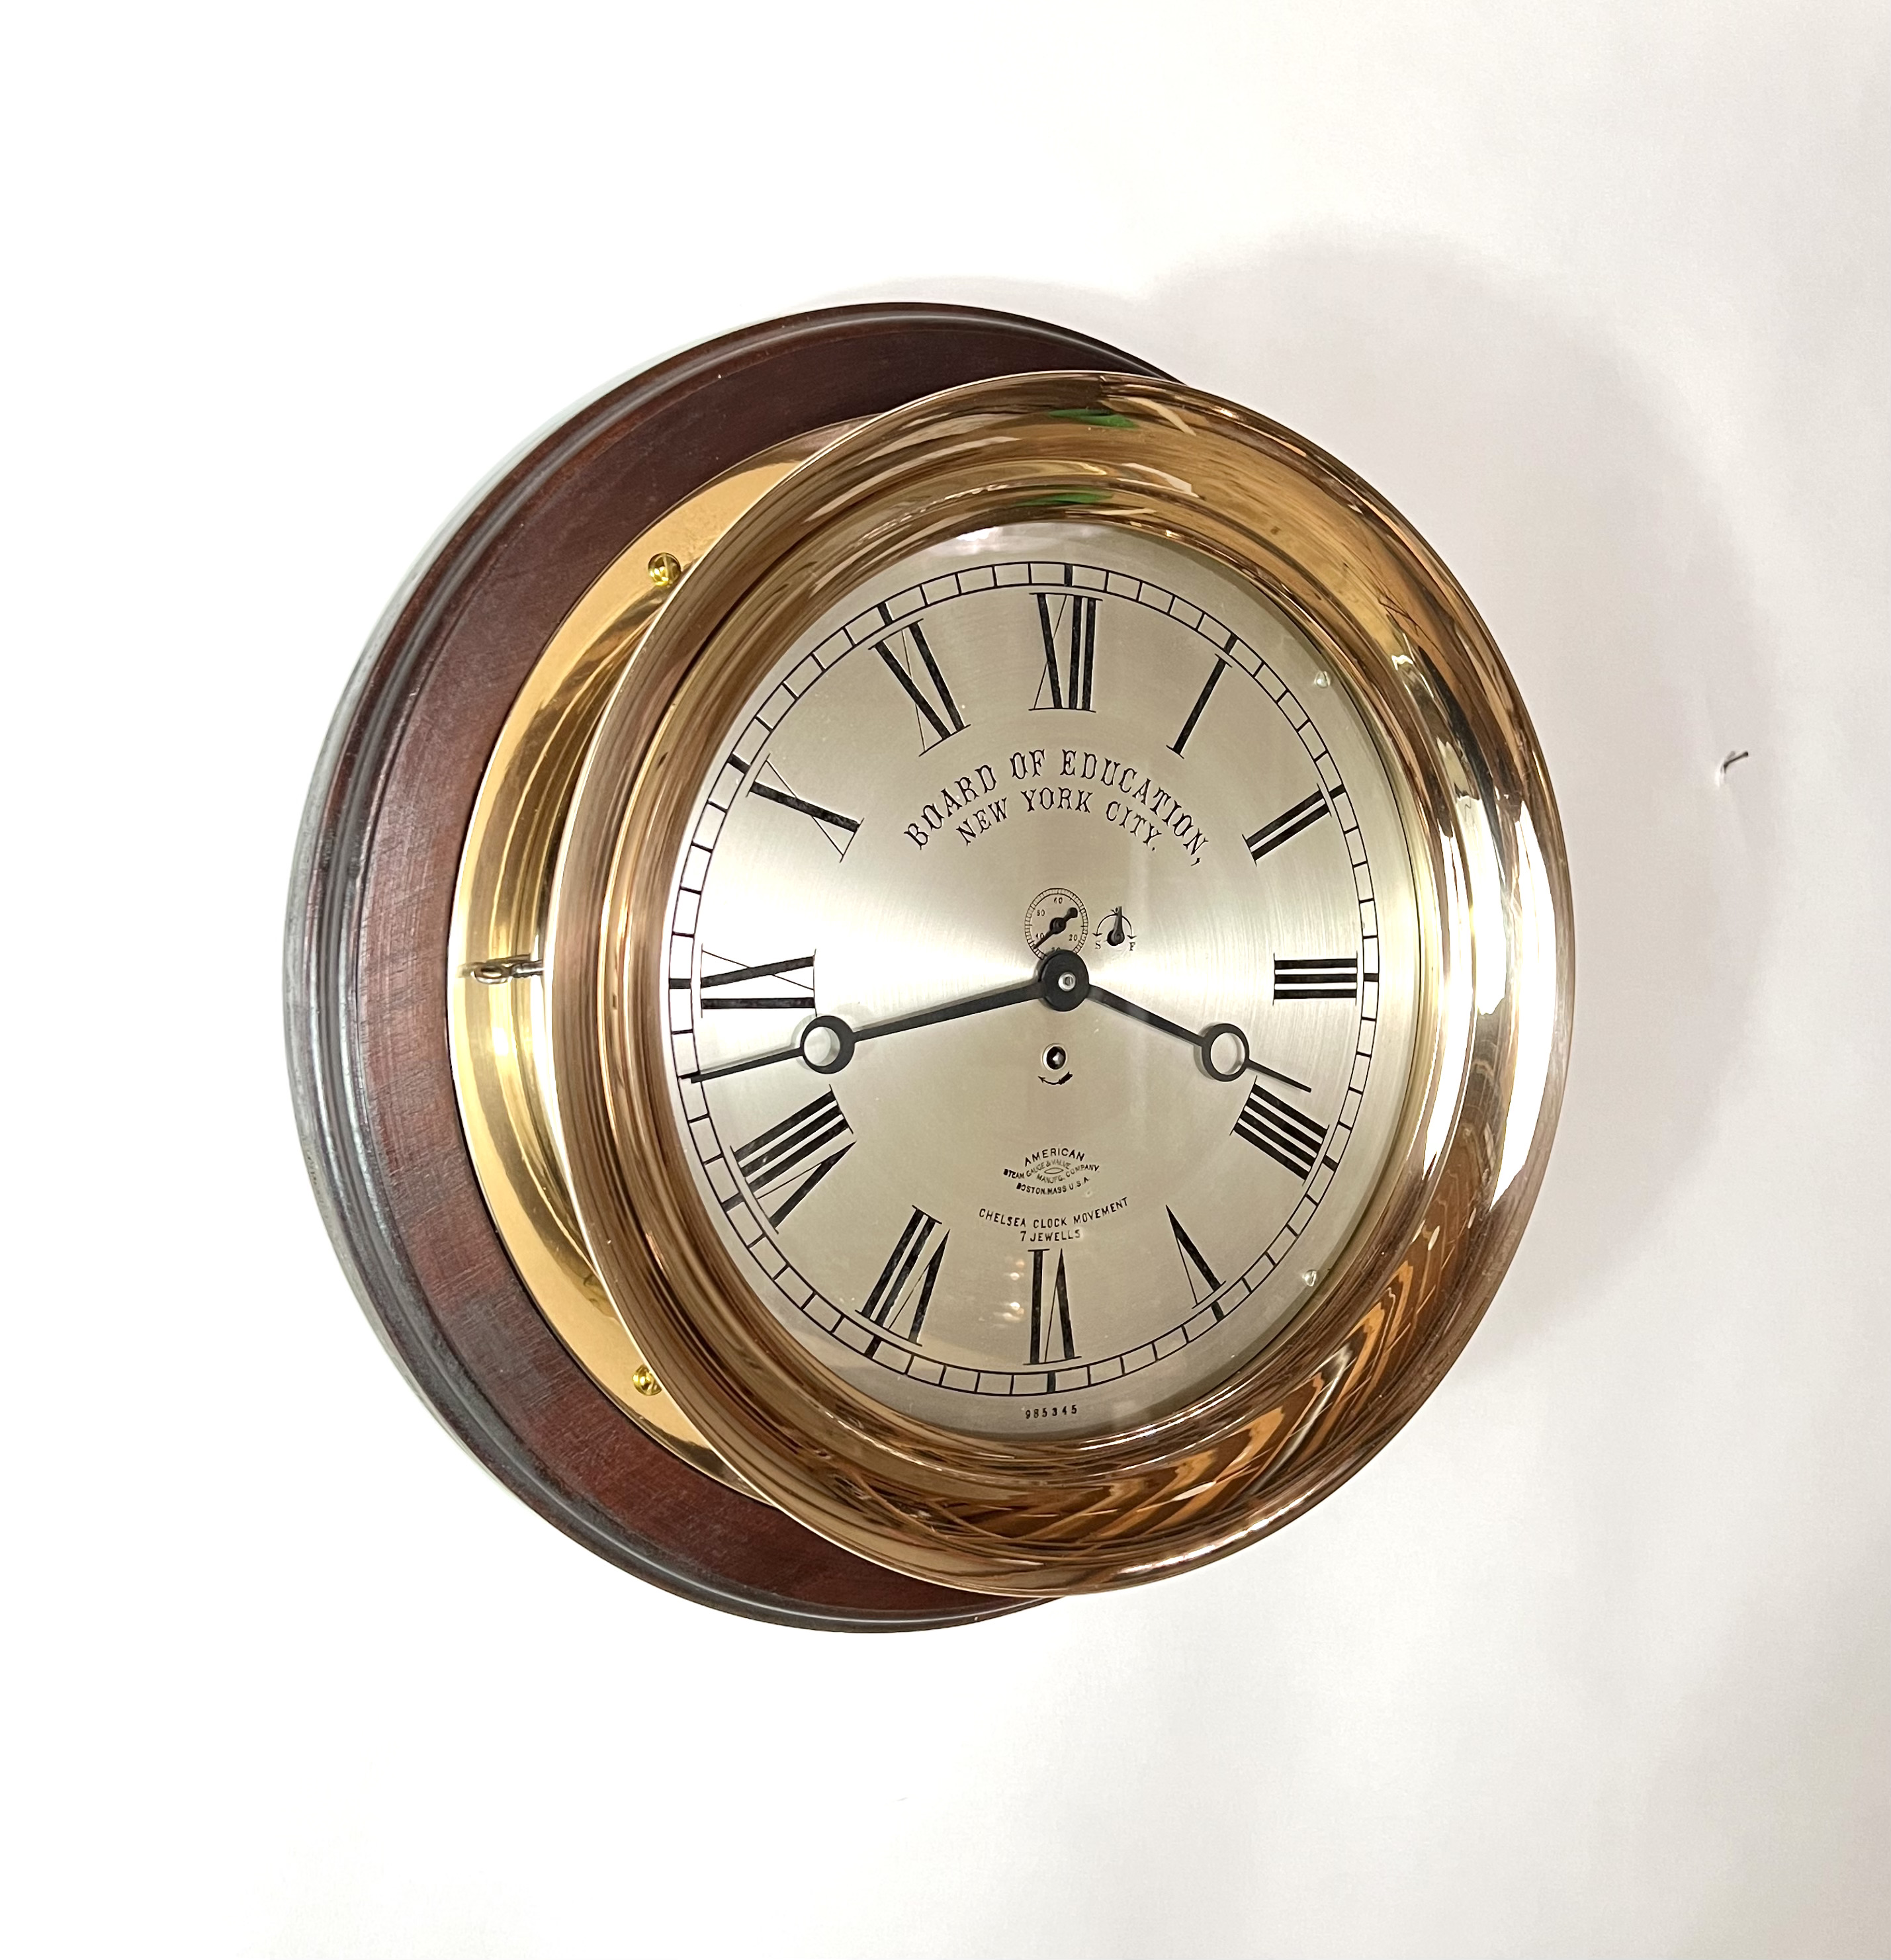 Chelsea 12 inch Marine Clock for NYC Board of Education